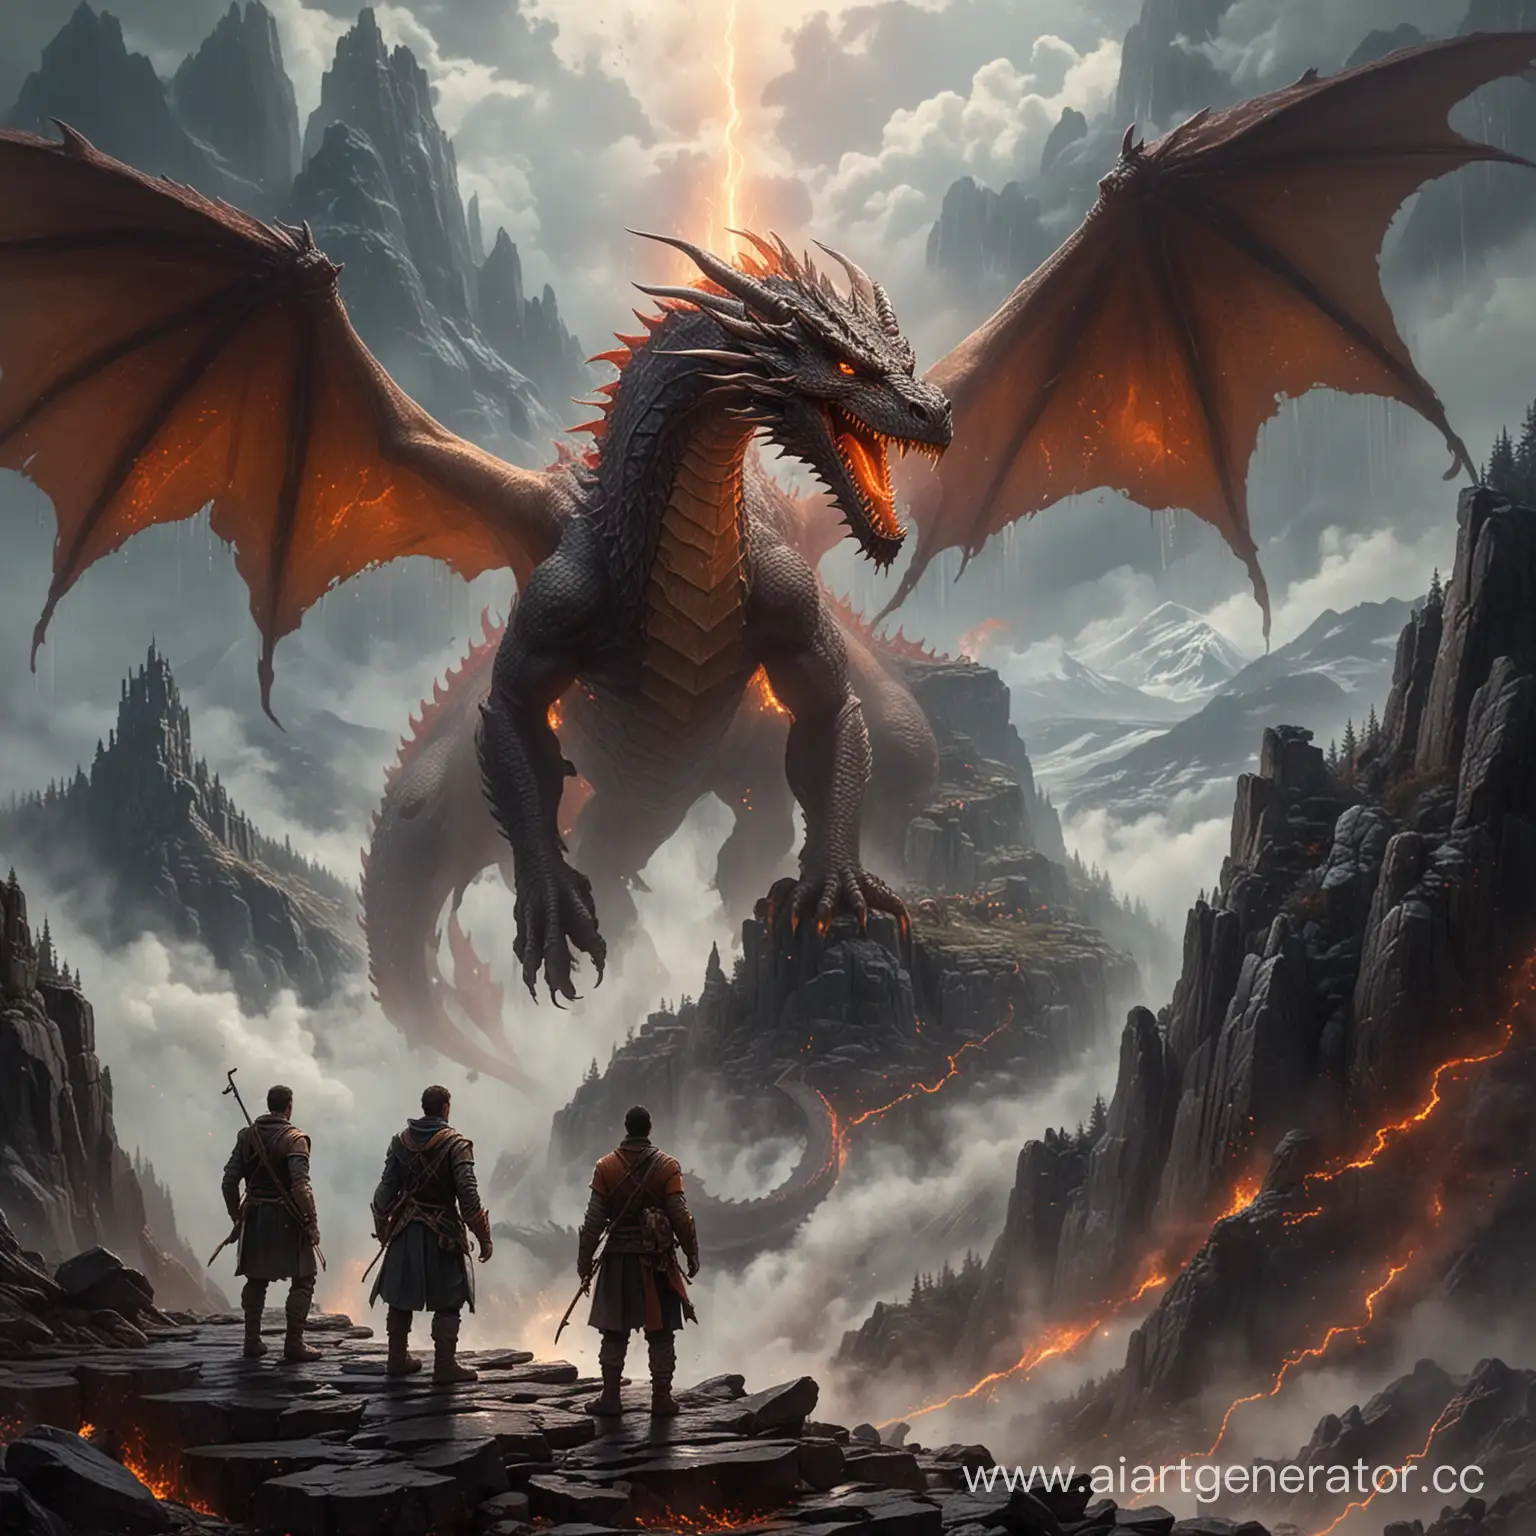 Fantasy-Art-ThreeHeaded-DragonGorynych-Towering-Over-a-Mountain-with-a-Brave-Traveler-Amidst-Fiery-Rain